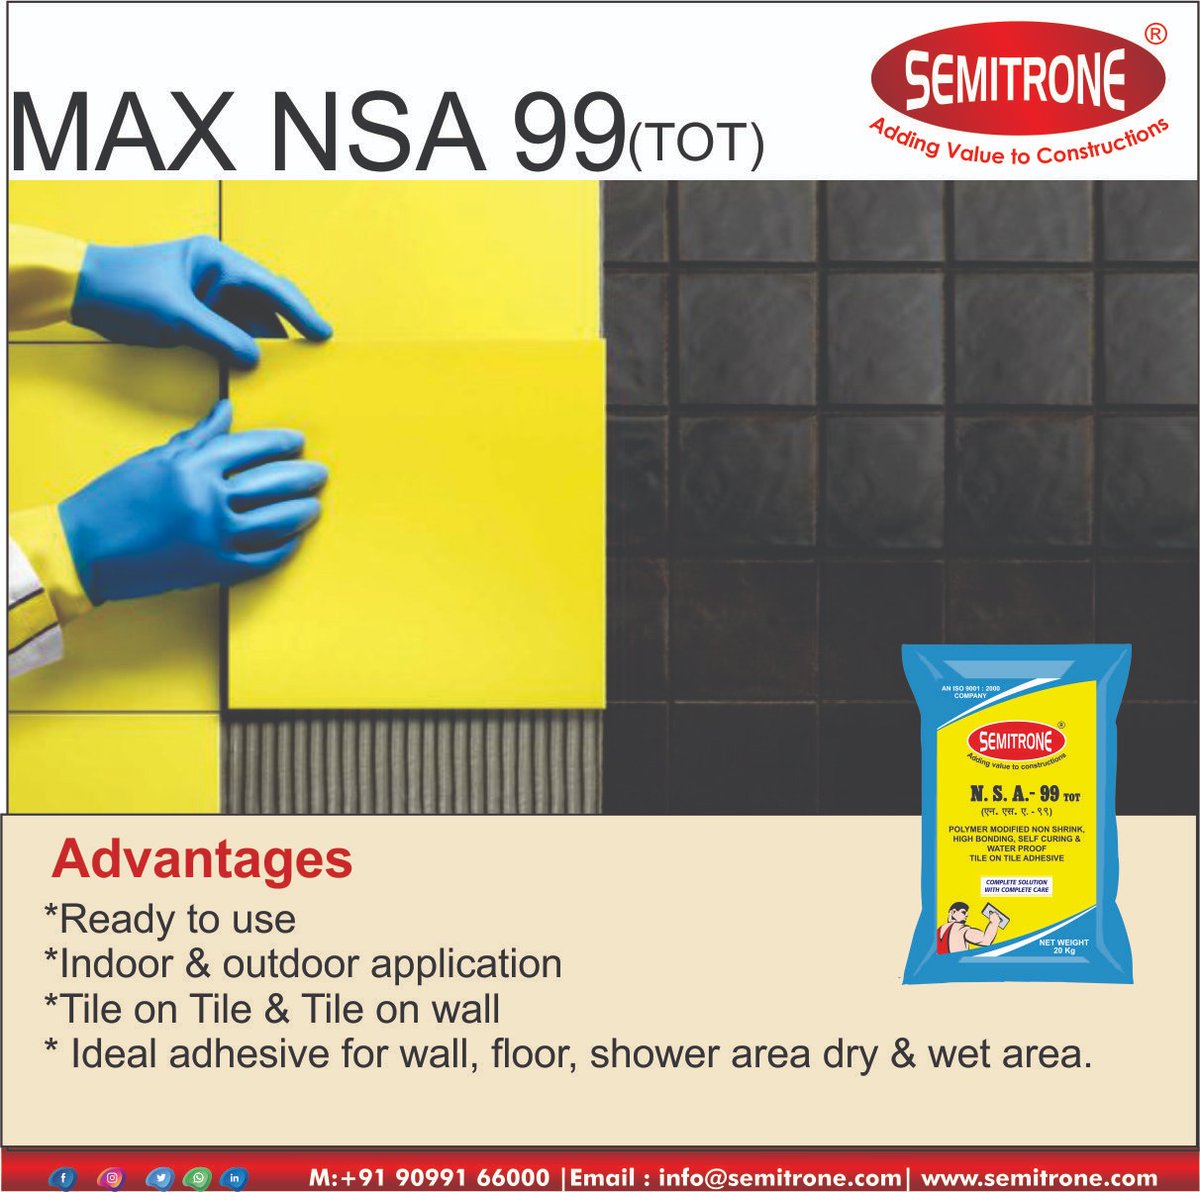 N.S.A. 99 is special tile adhesive for “Tile on Tile” application.It is specially made for Ceramic Tiles, Vitrified Tiles flooring etc. It is both for exterior and interior applications.
#tileontile #adhesive #waterproofingchemical #constructionchemical #Semitroneconchem